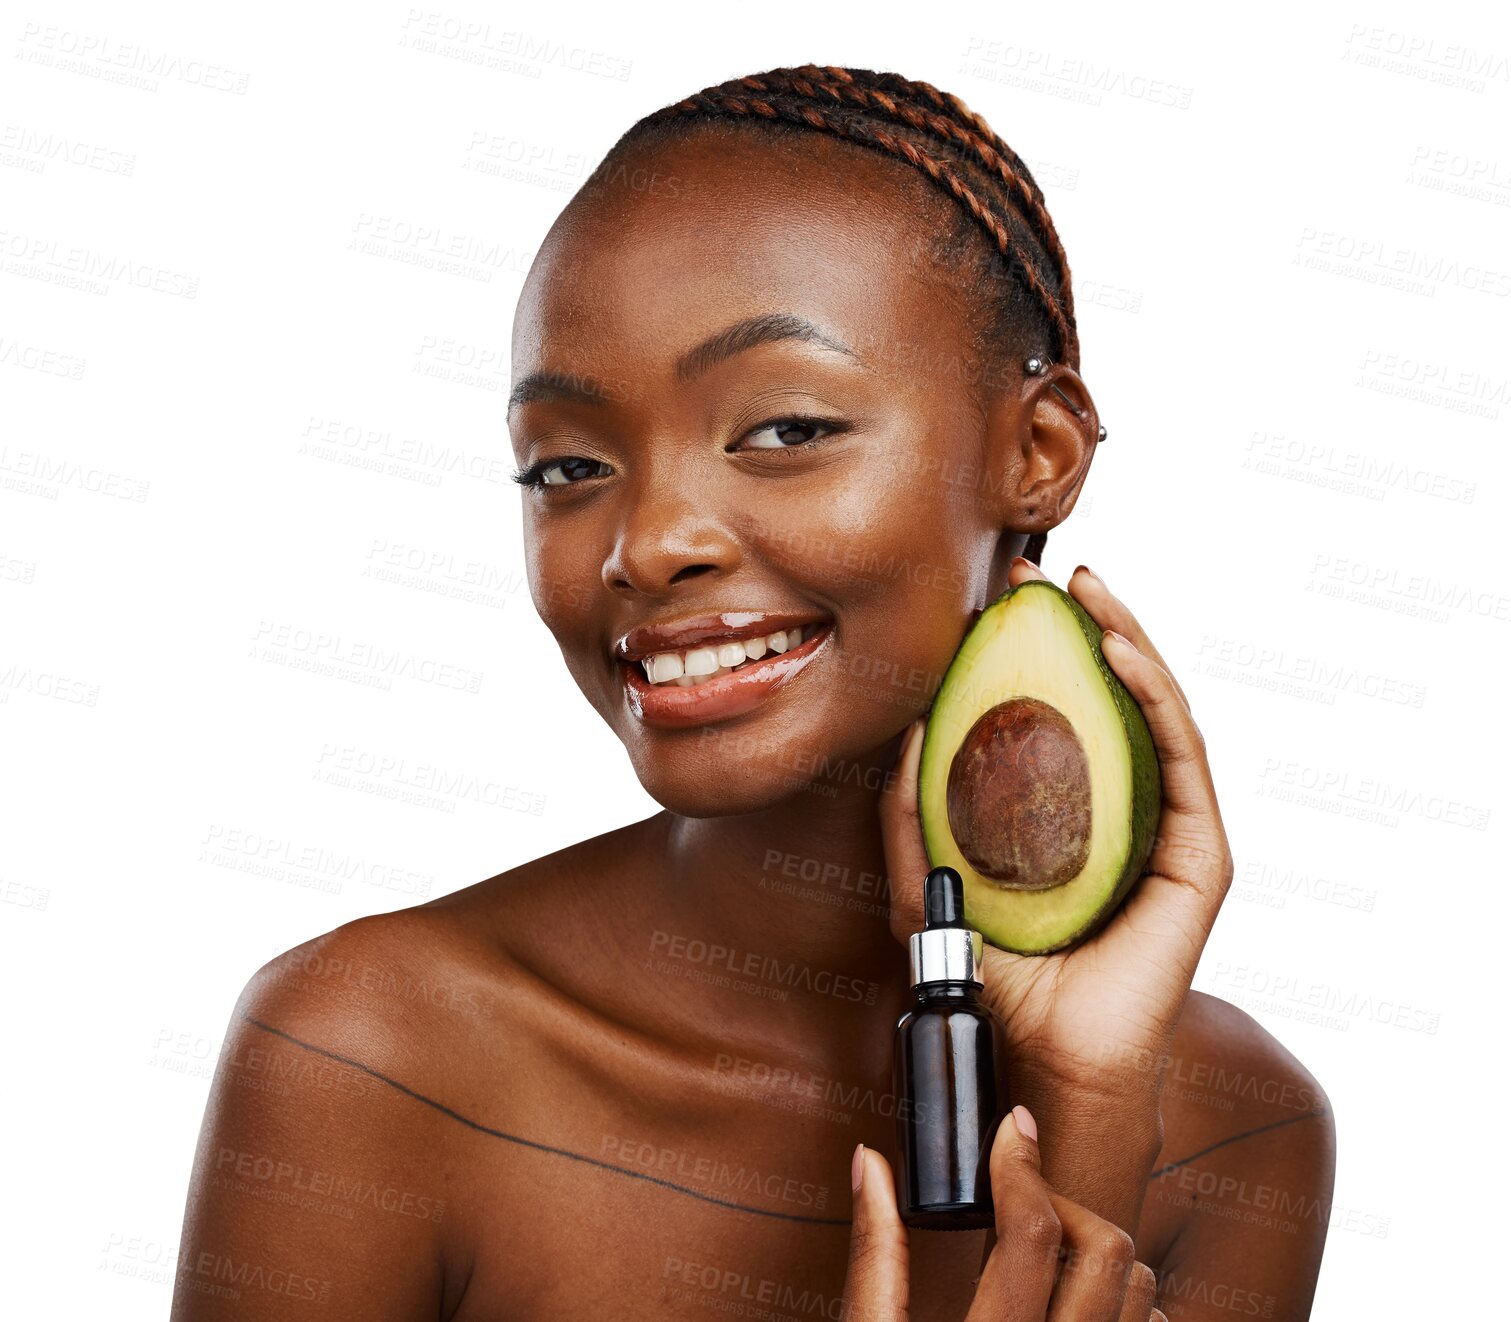 Buy stock photo Skincare, portrait and black woman with avocado, oil or results on isolated, transparent or png background. Beauty, face and happy model with product for dermatology, wellness or omega 3 facial